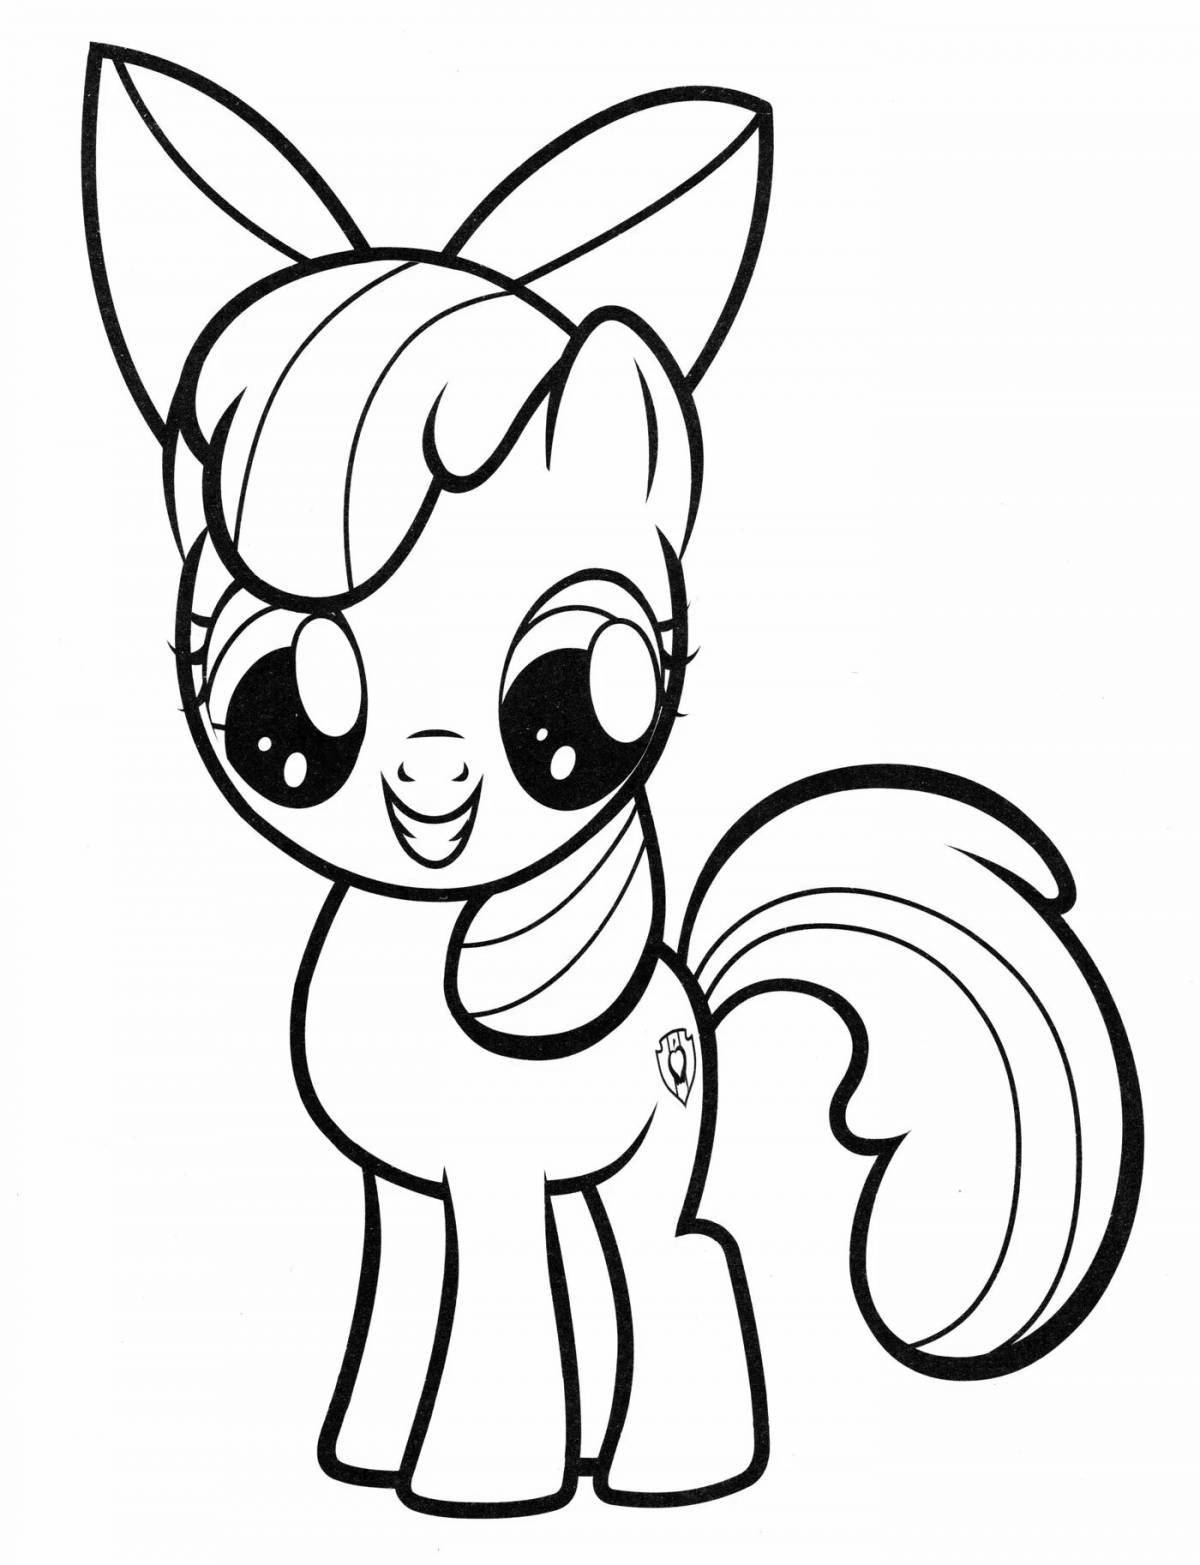 Funny pony turn on coloring